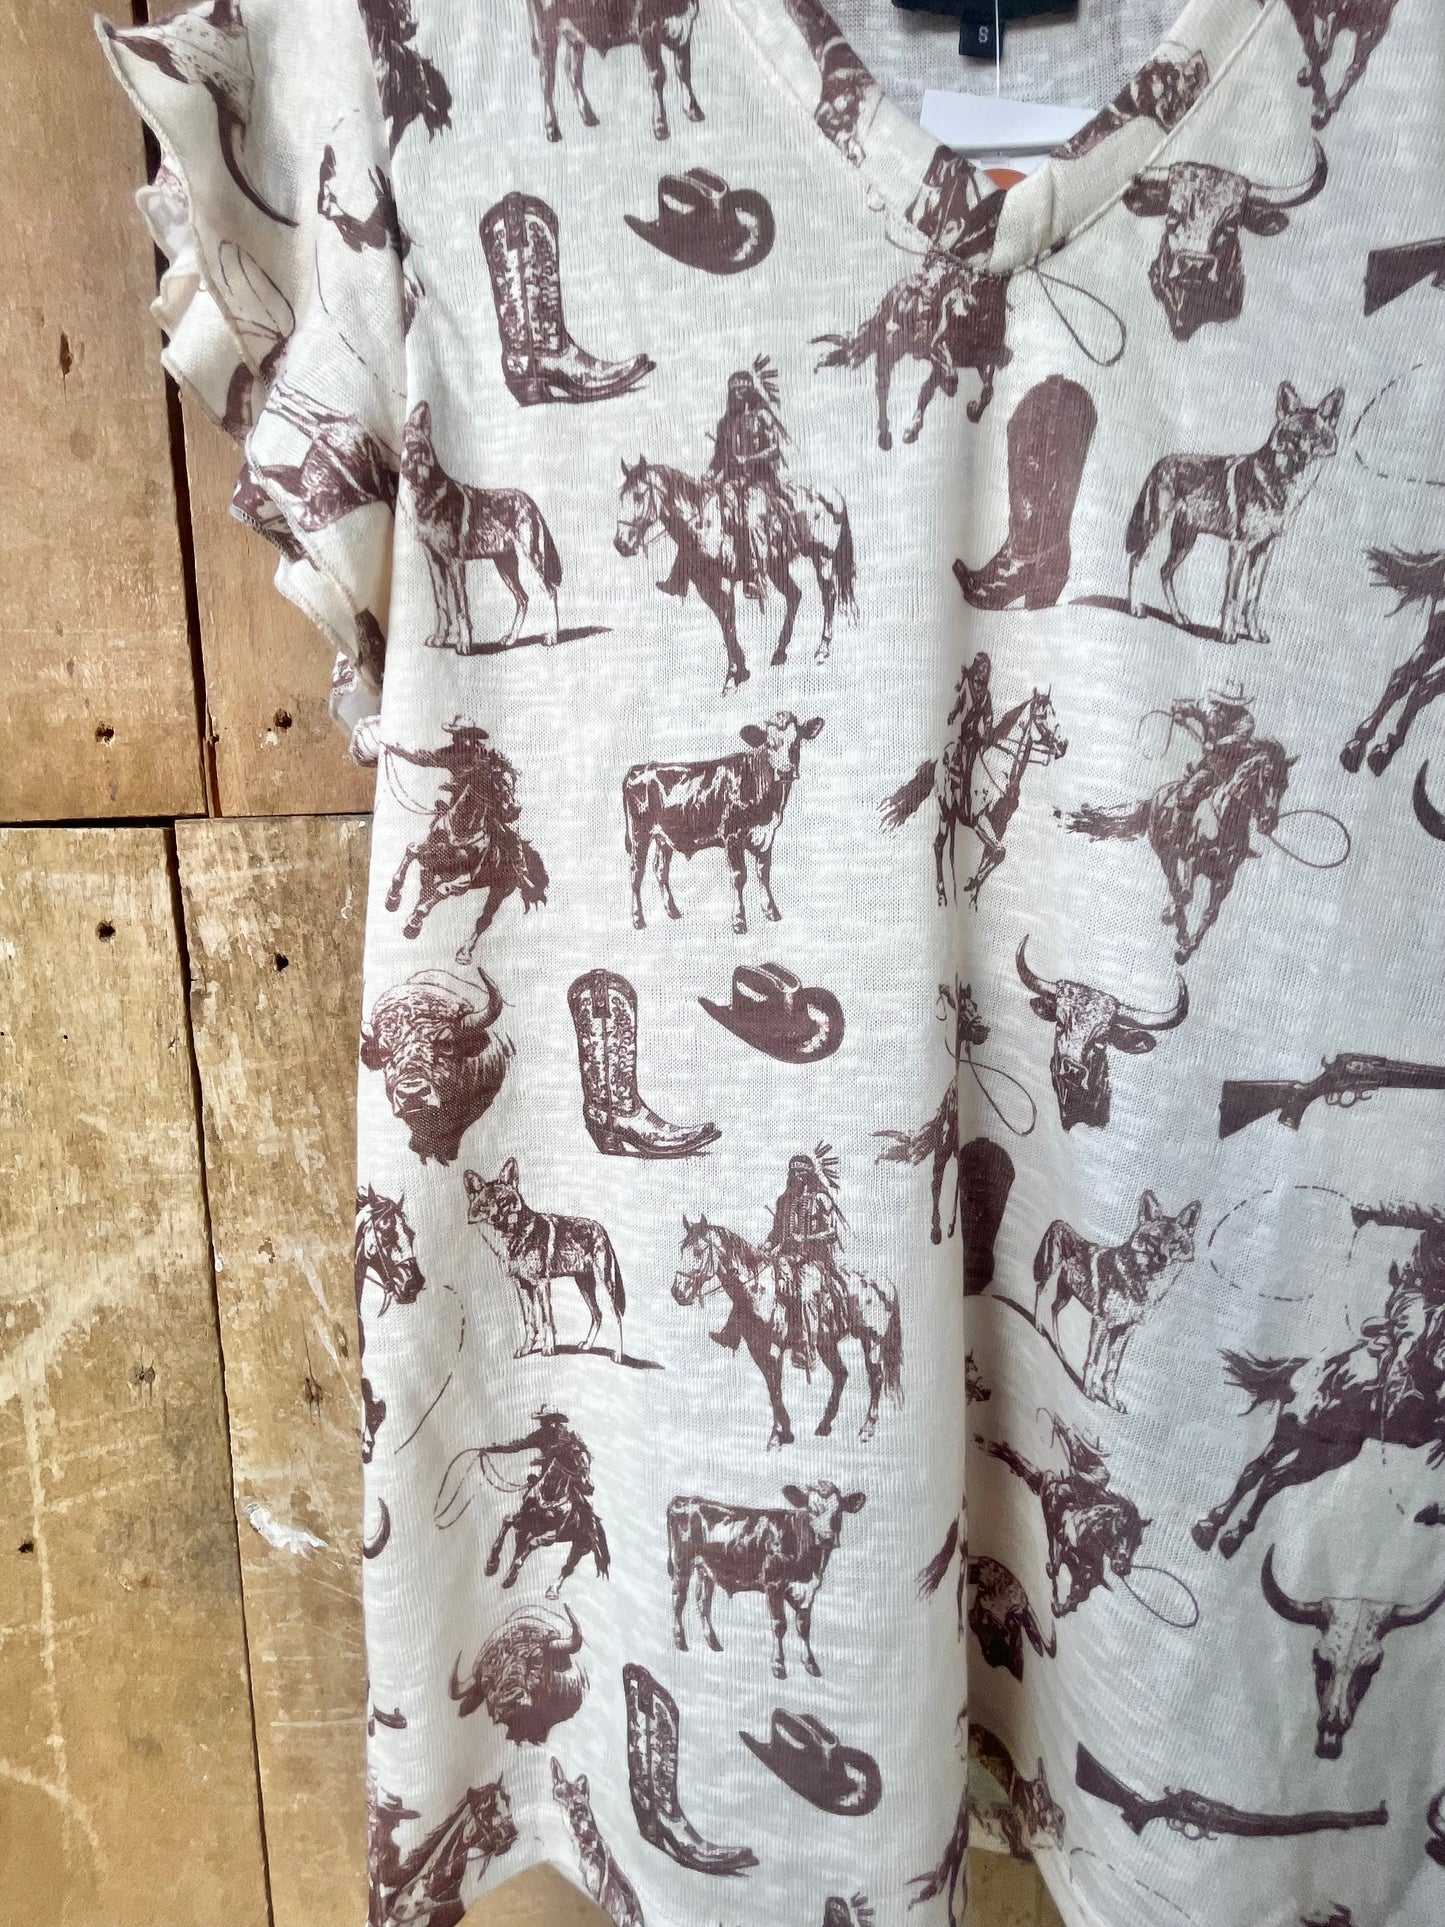 The Cowboys and Indians Top